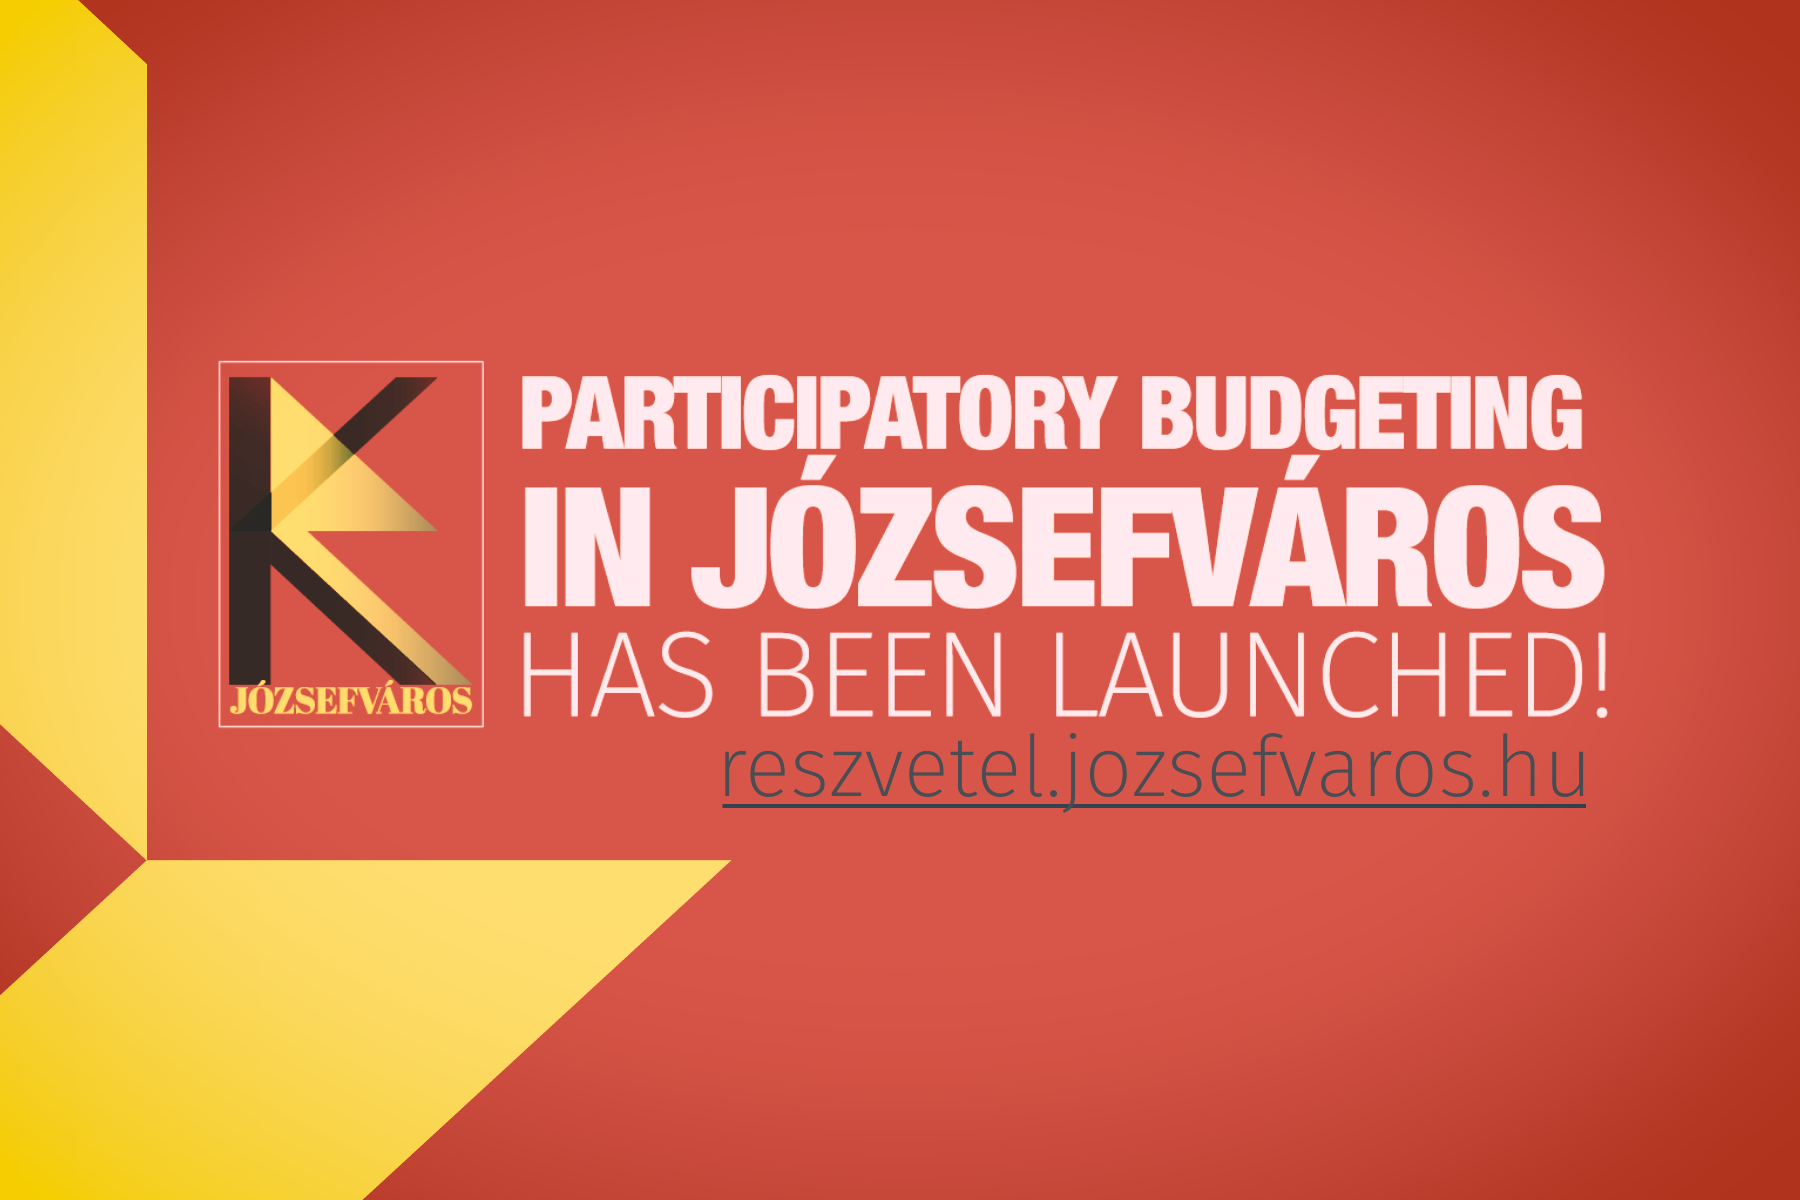 Participatory Budgeting in Józsefváros has been launched!